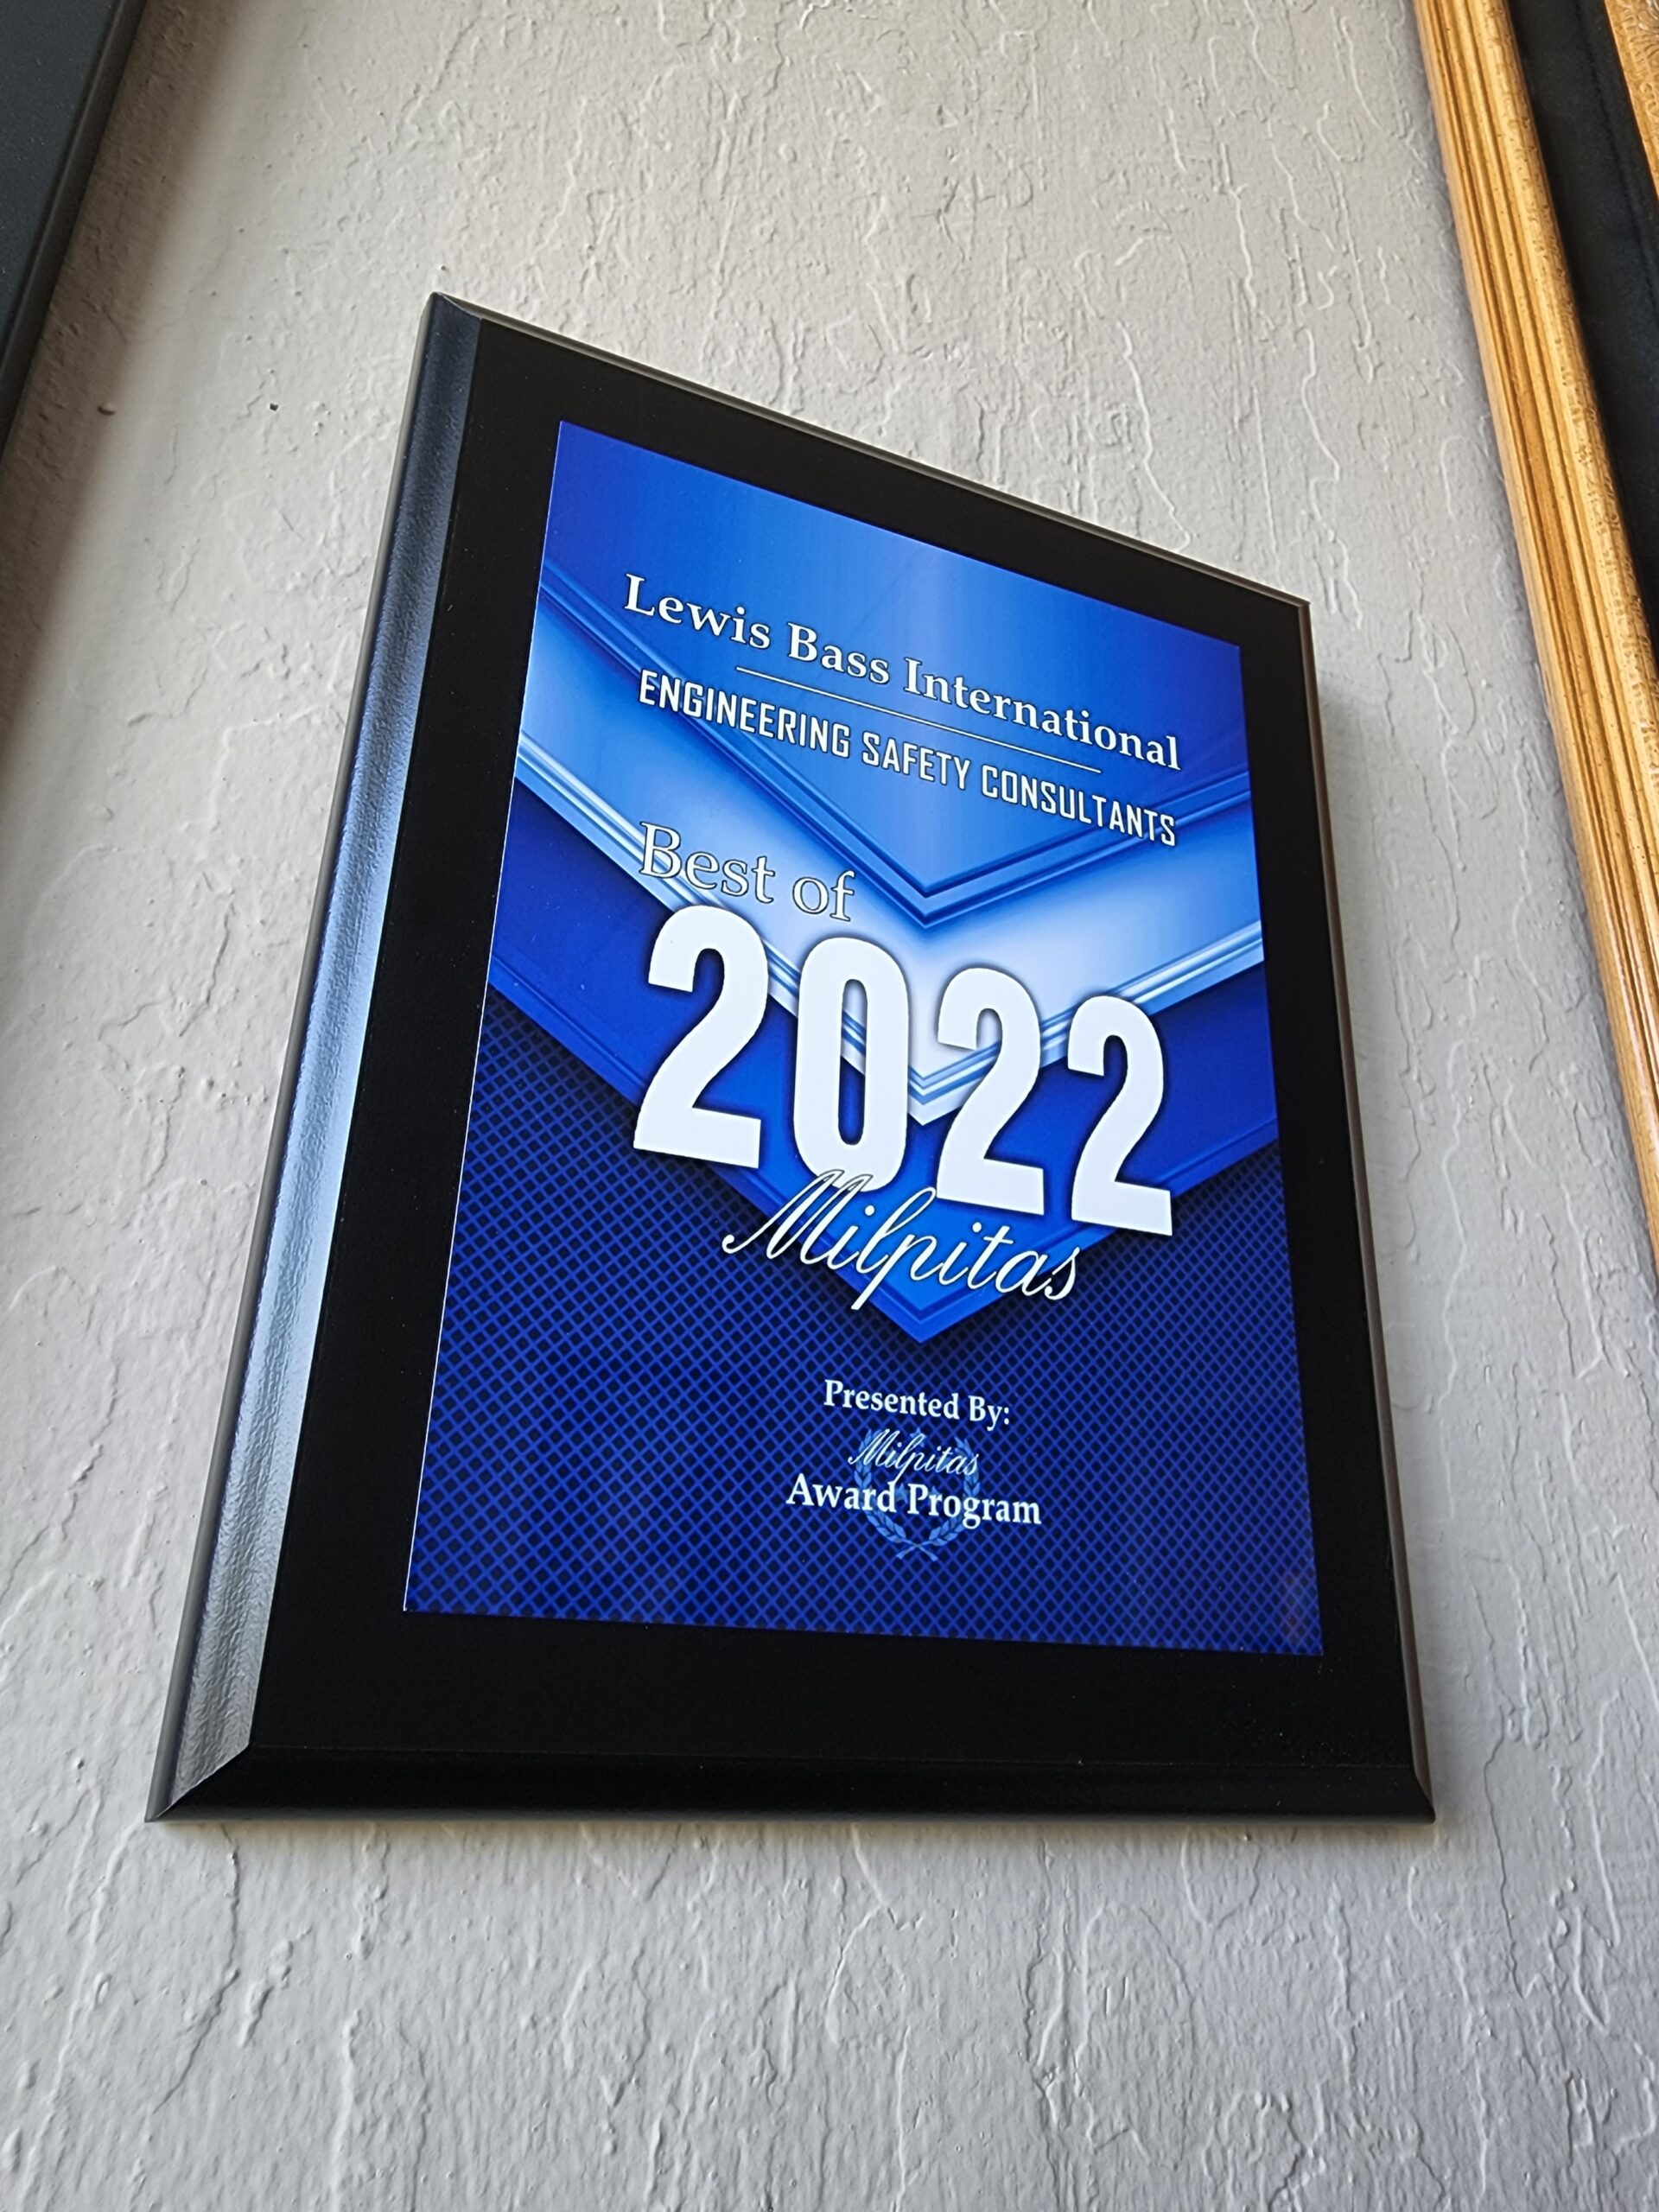 LBIES Receives 2022 Best of Milpitas Award for Engineering Safety Consulting